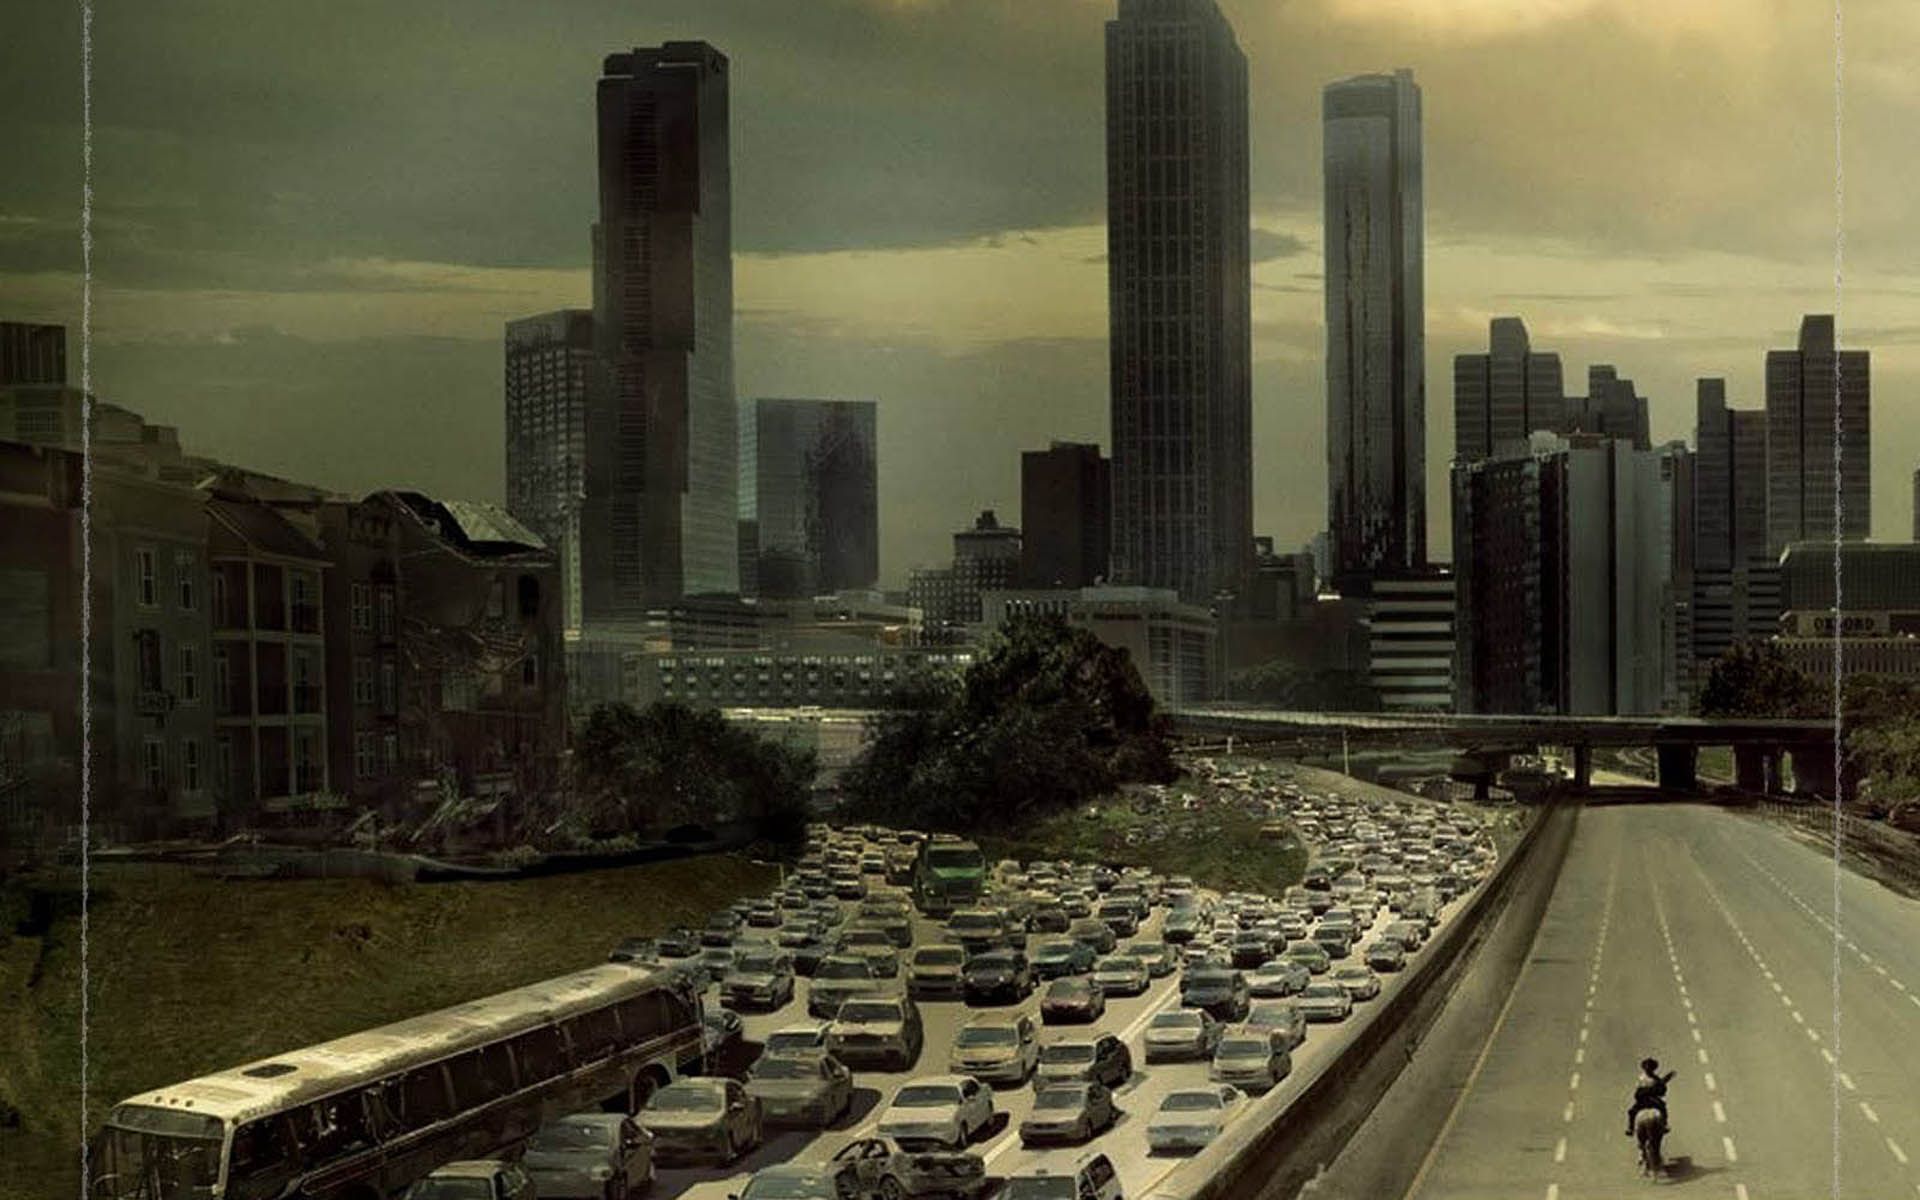 The Walking Dead Poster 1920x1200 Wallpapers, 1920x1200 Wallpapers ...